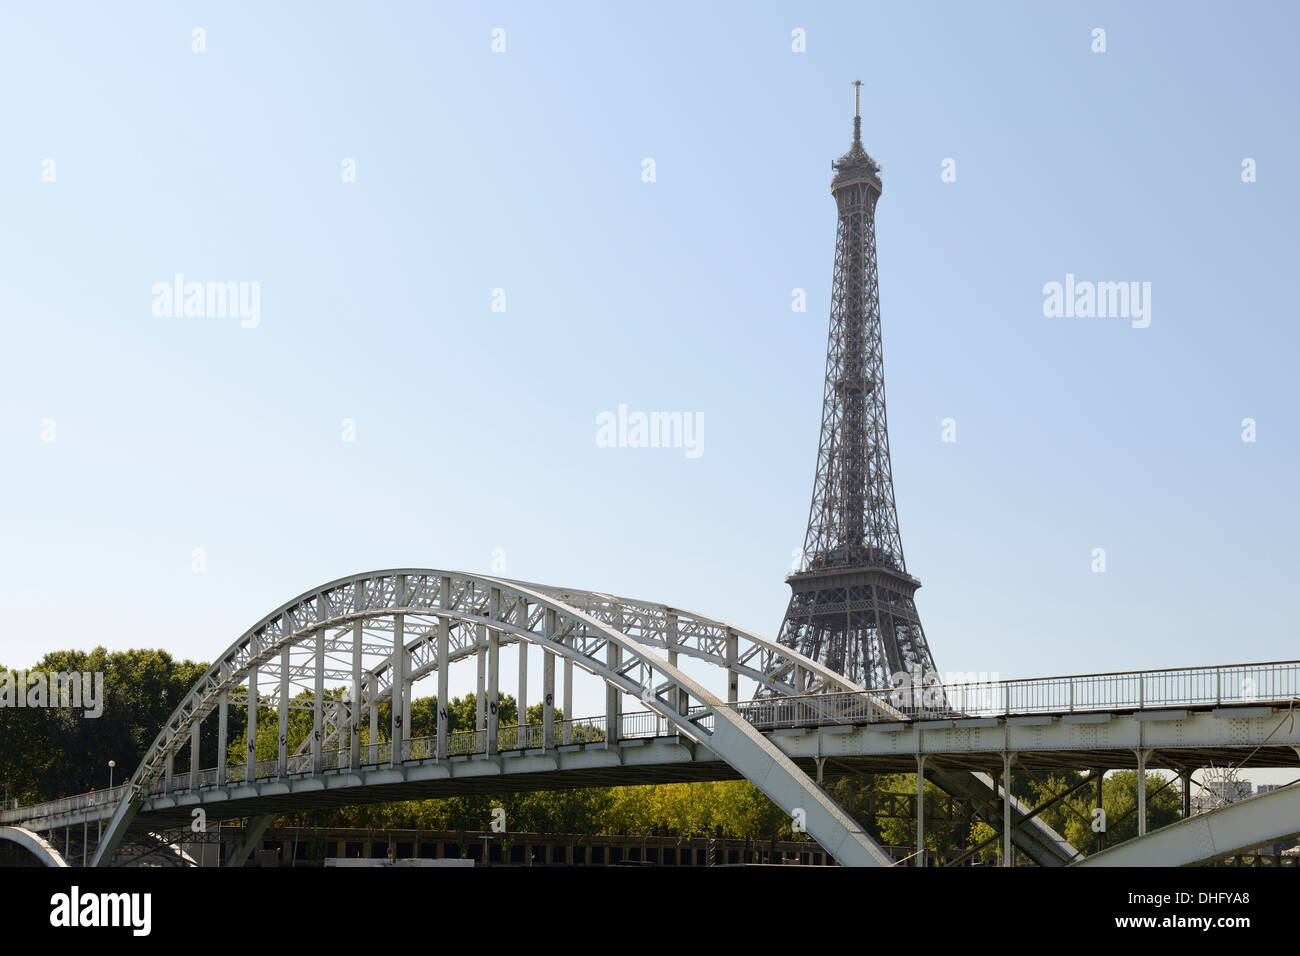 The Eiffel Tower rising above a the Passerelle Debilly in Paris, France, Europe. Stock Photo